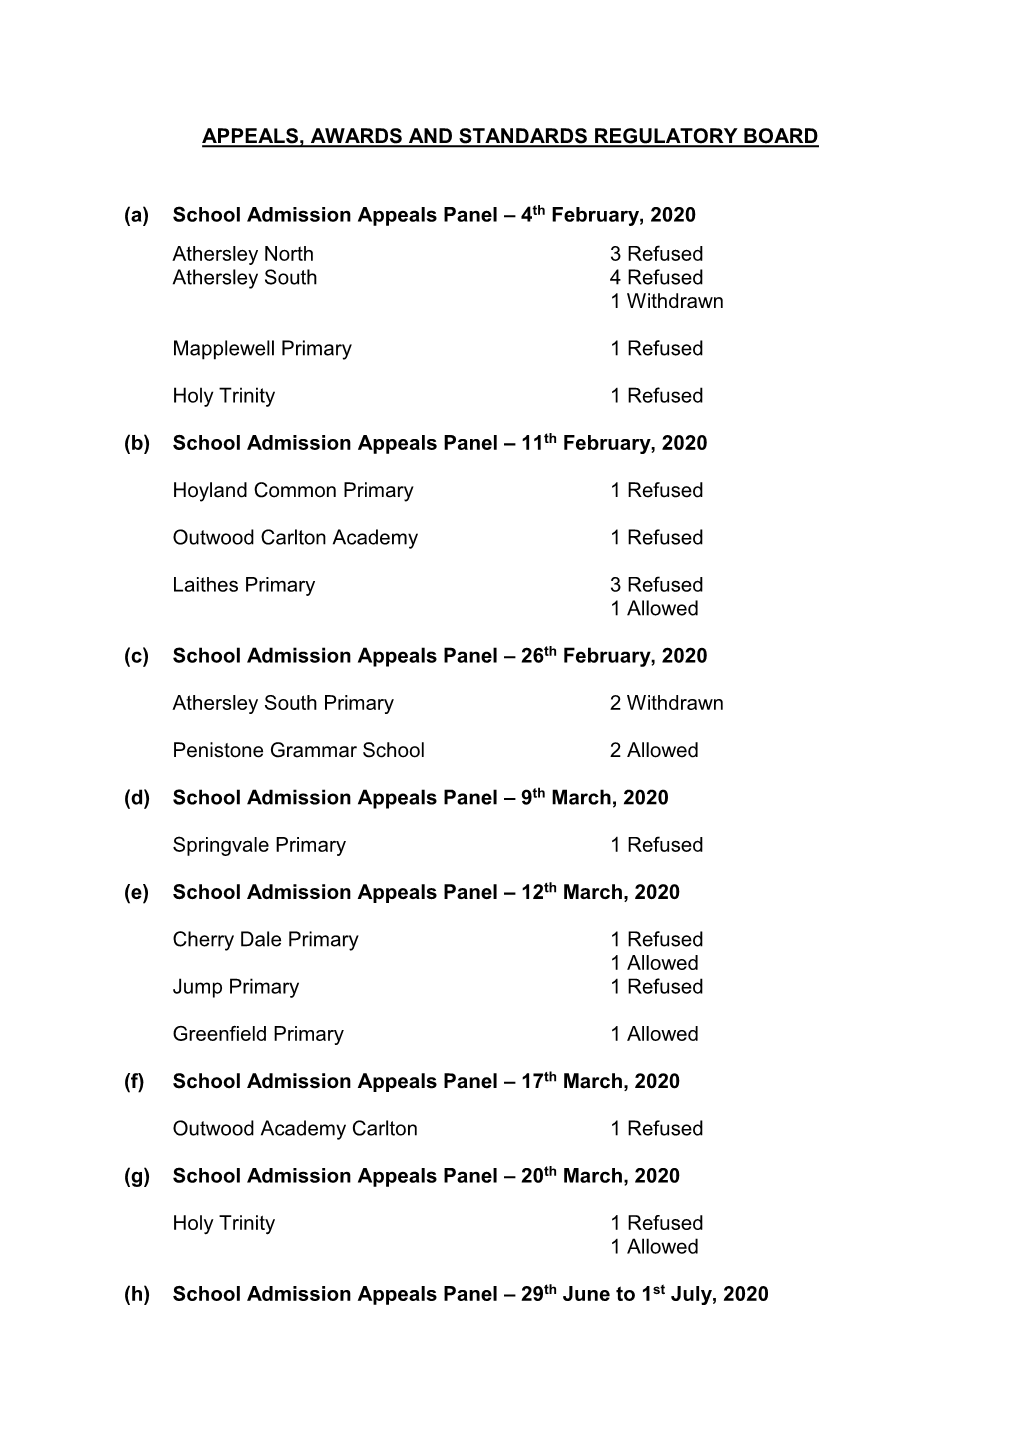 APPEALS, AWARDS and STANDARDS REGULATORY BOARD (A) School Admission Appeals Panel – 4Th February, 2020 Athersley North 3 Refus